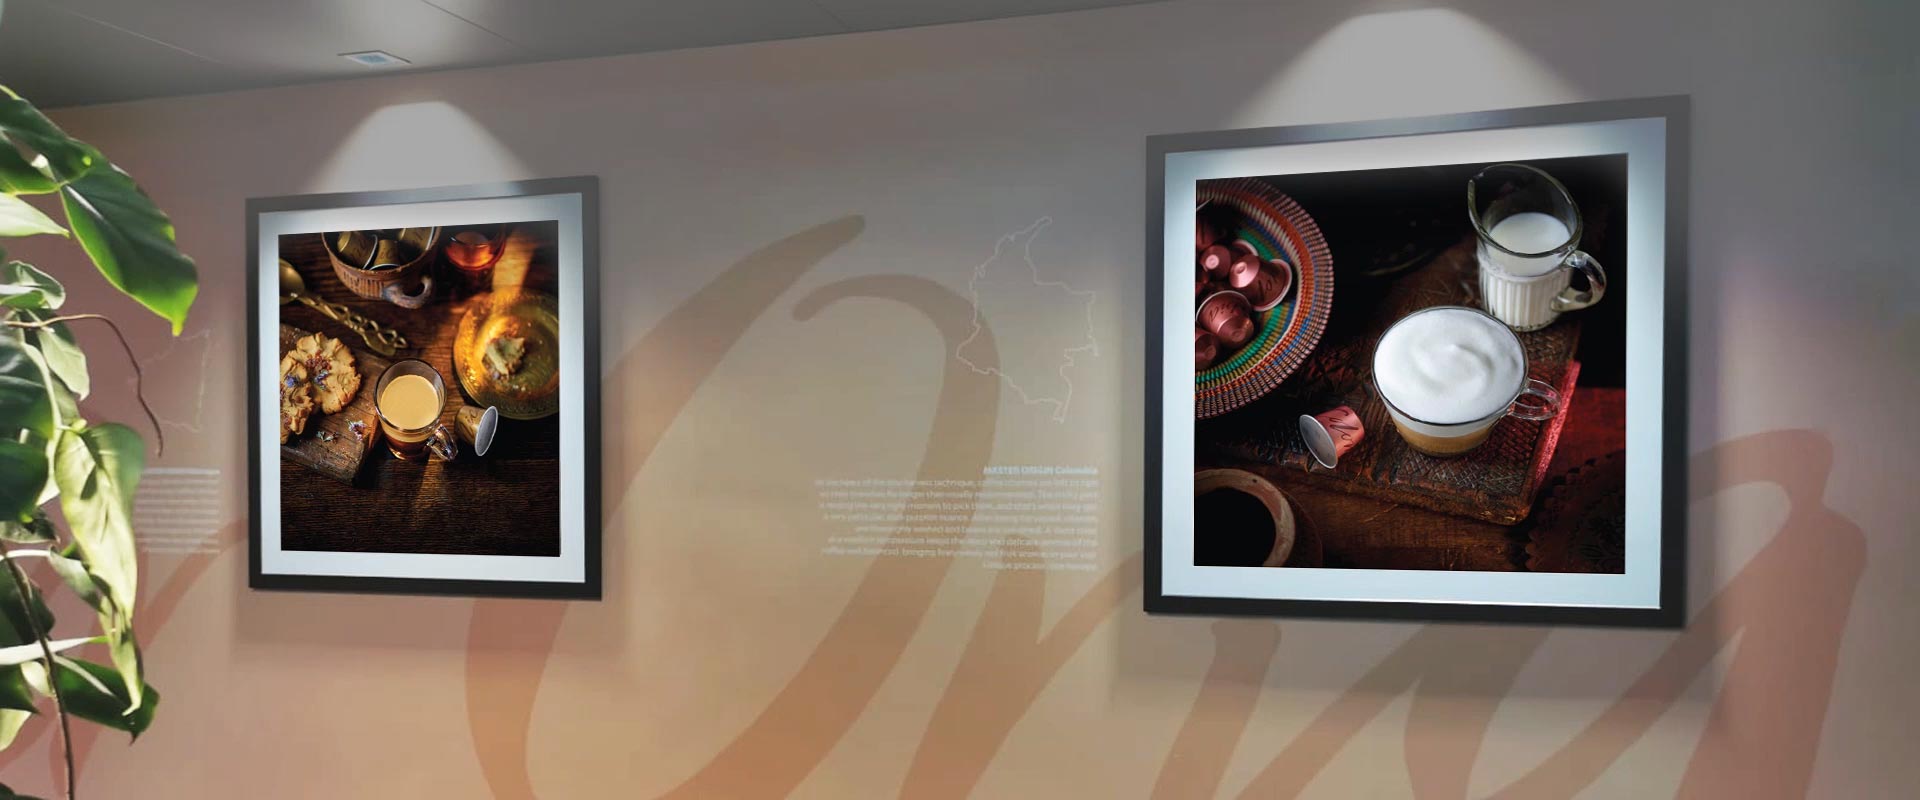 The iconic Nespresso photographs in the halls